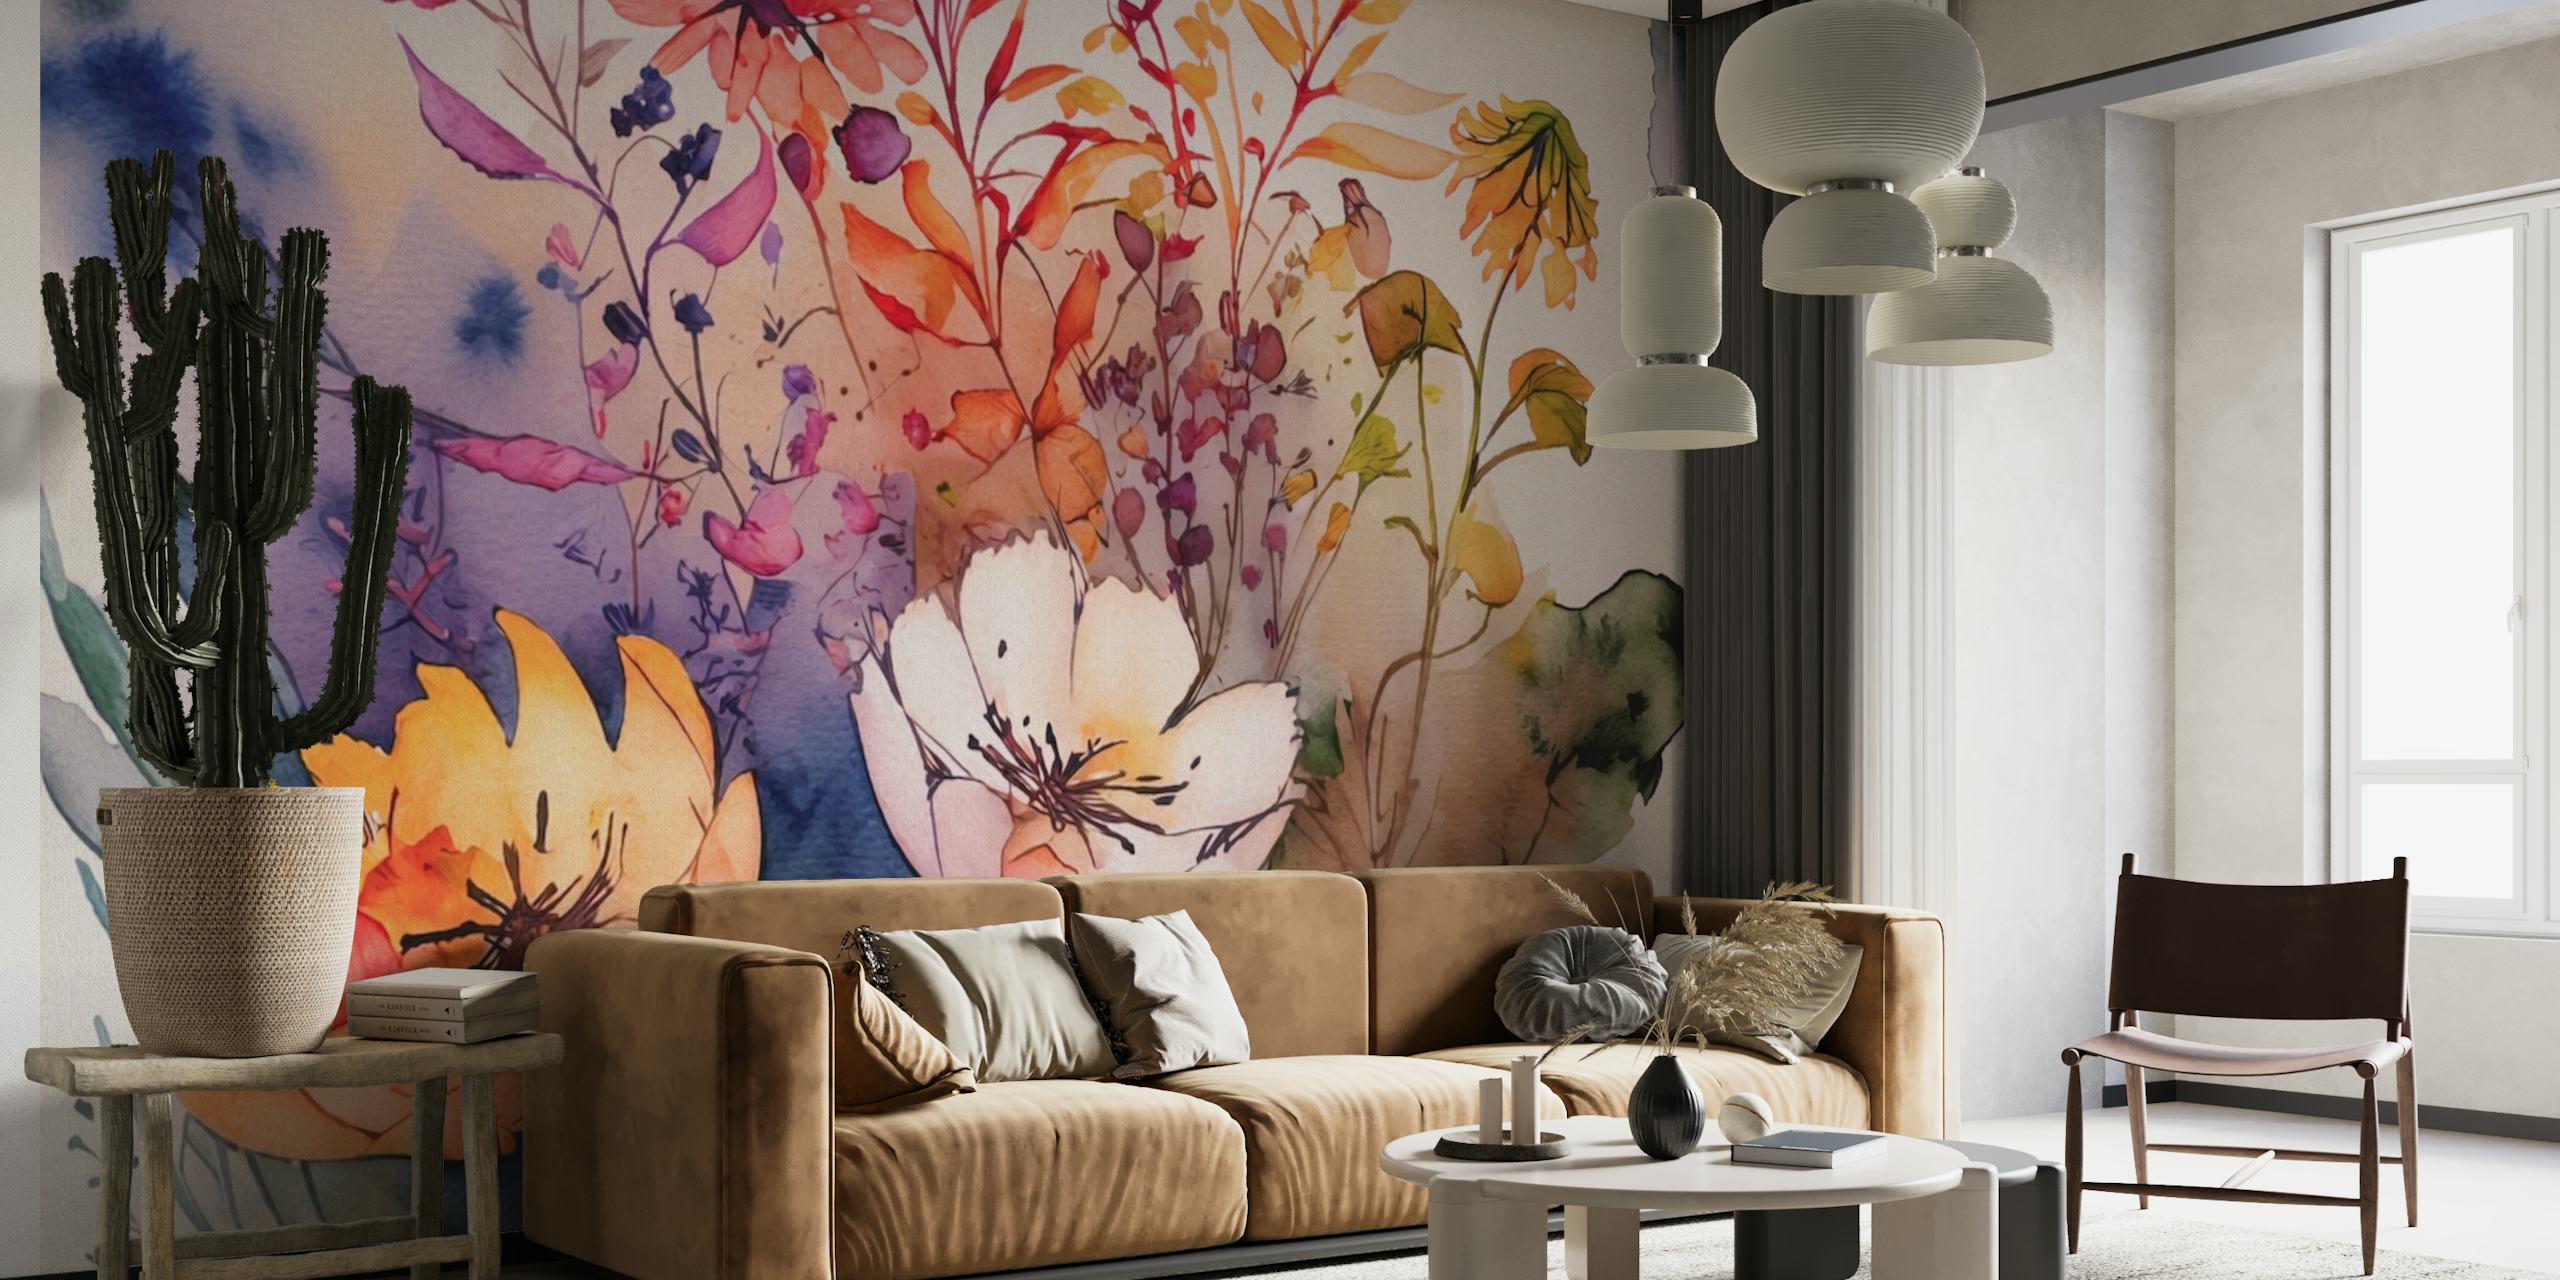 Elegant watercolor floral abstract art wall mural with soft pastel tones and artistic blooms